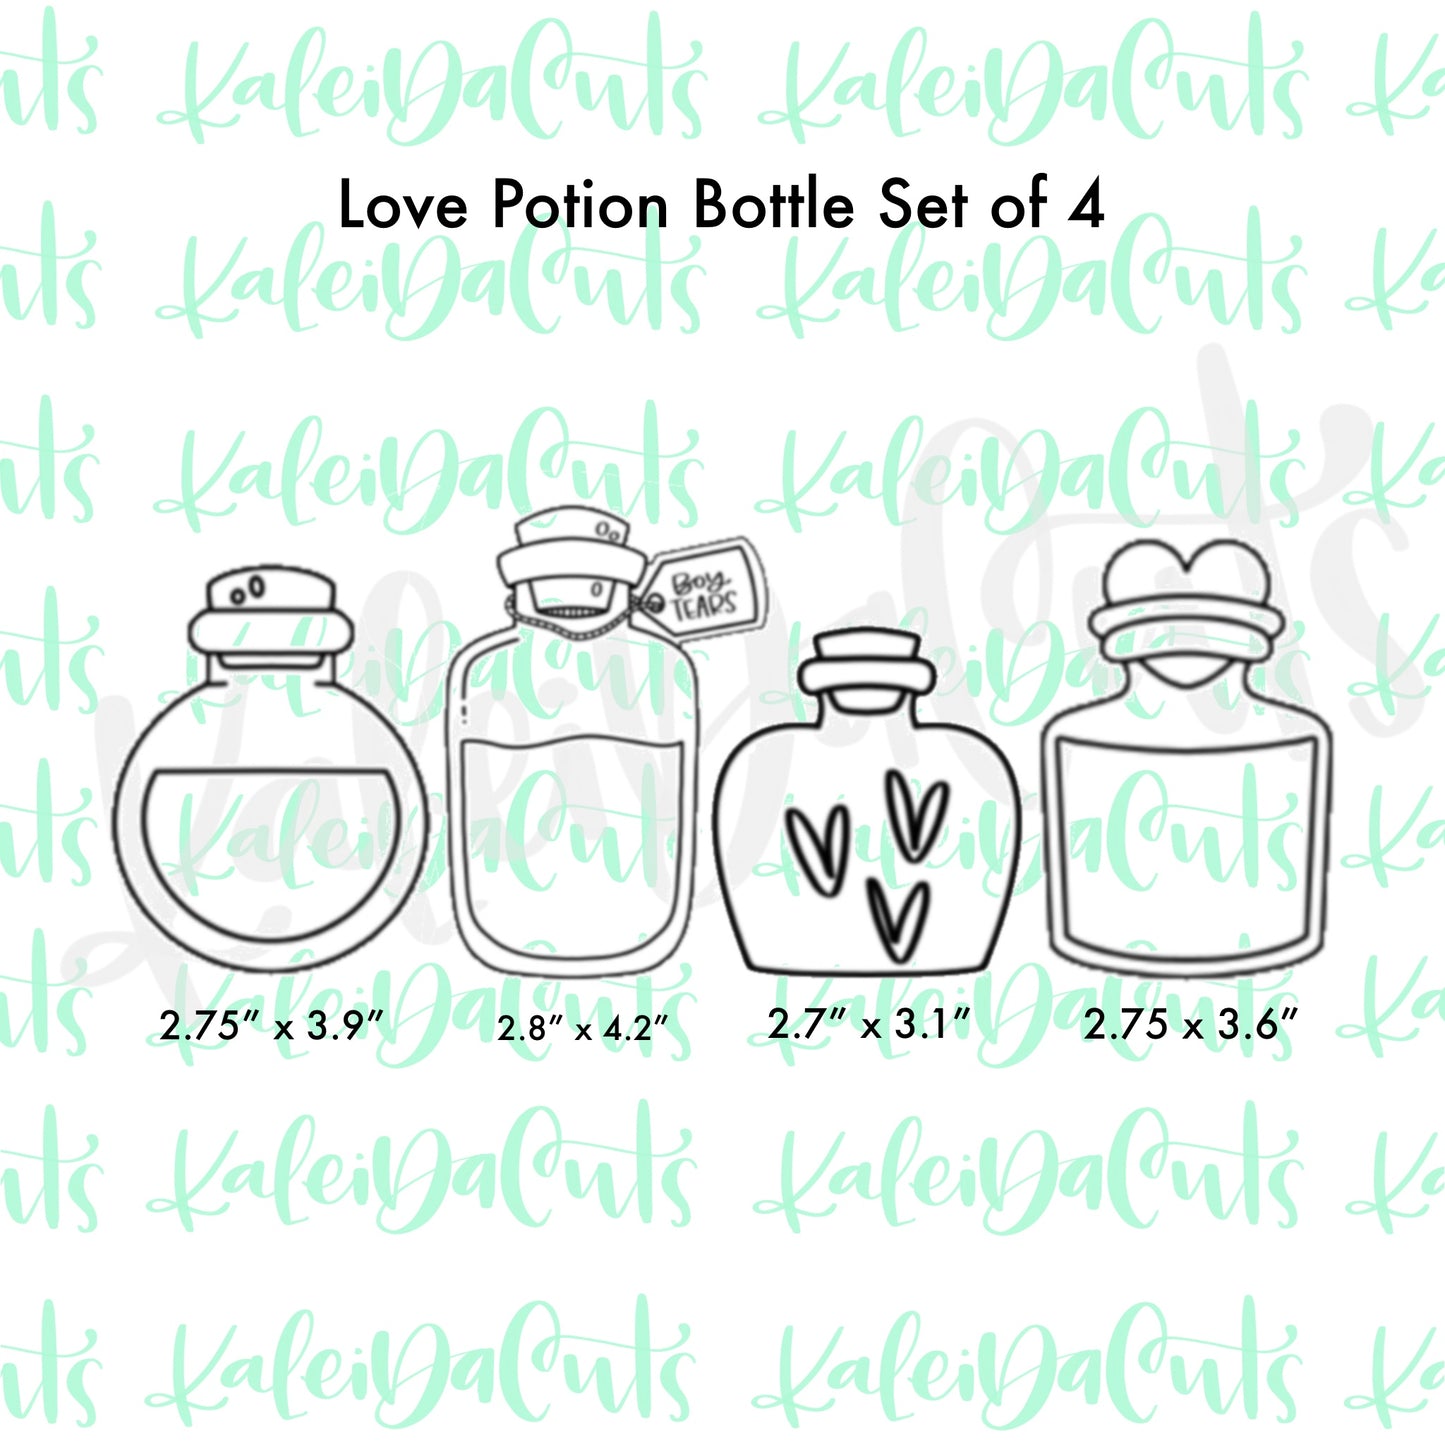 Love Potion Bottle Set of 4 Cookie Cutters